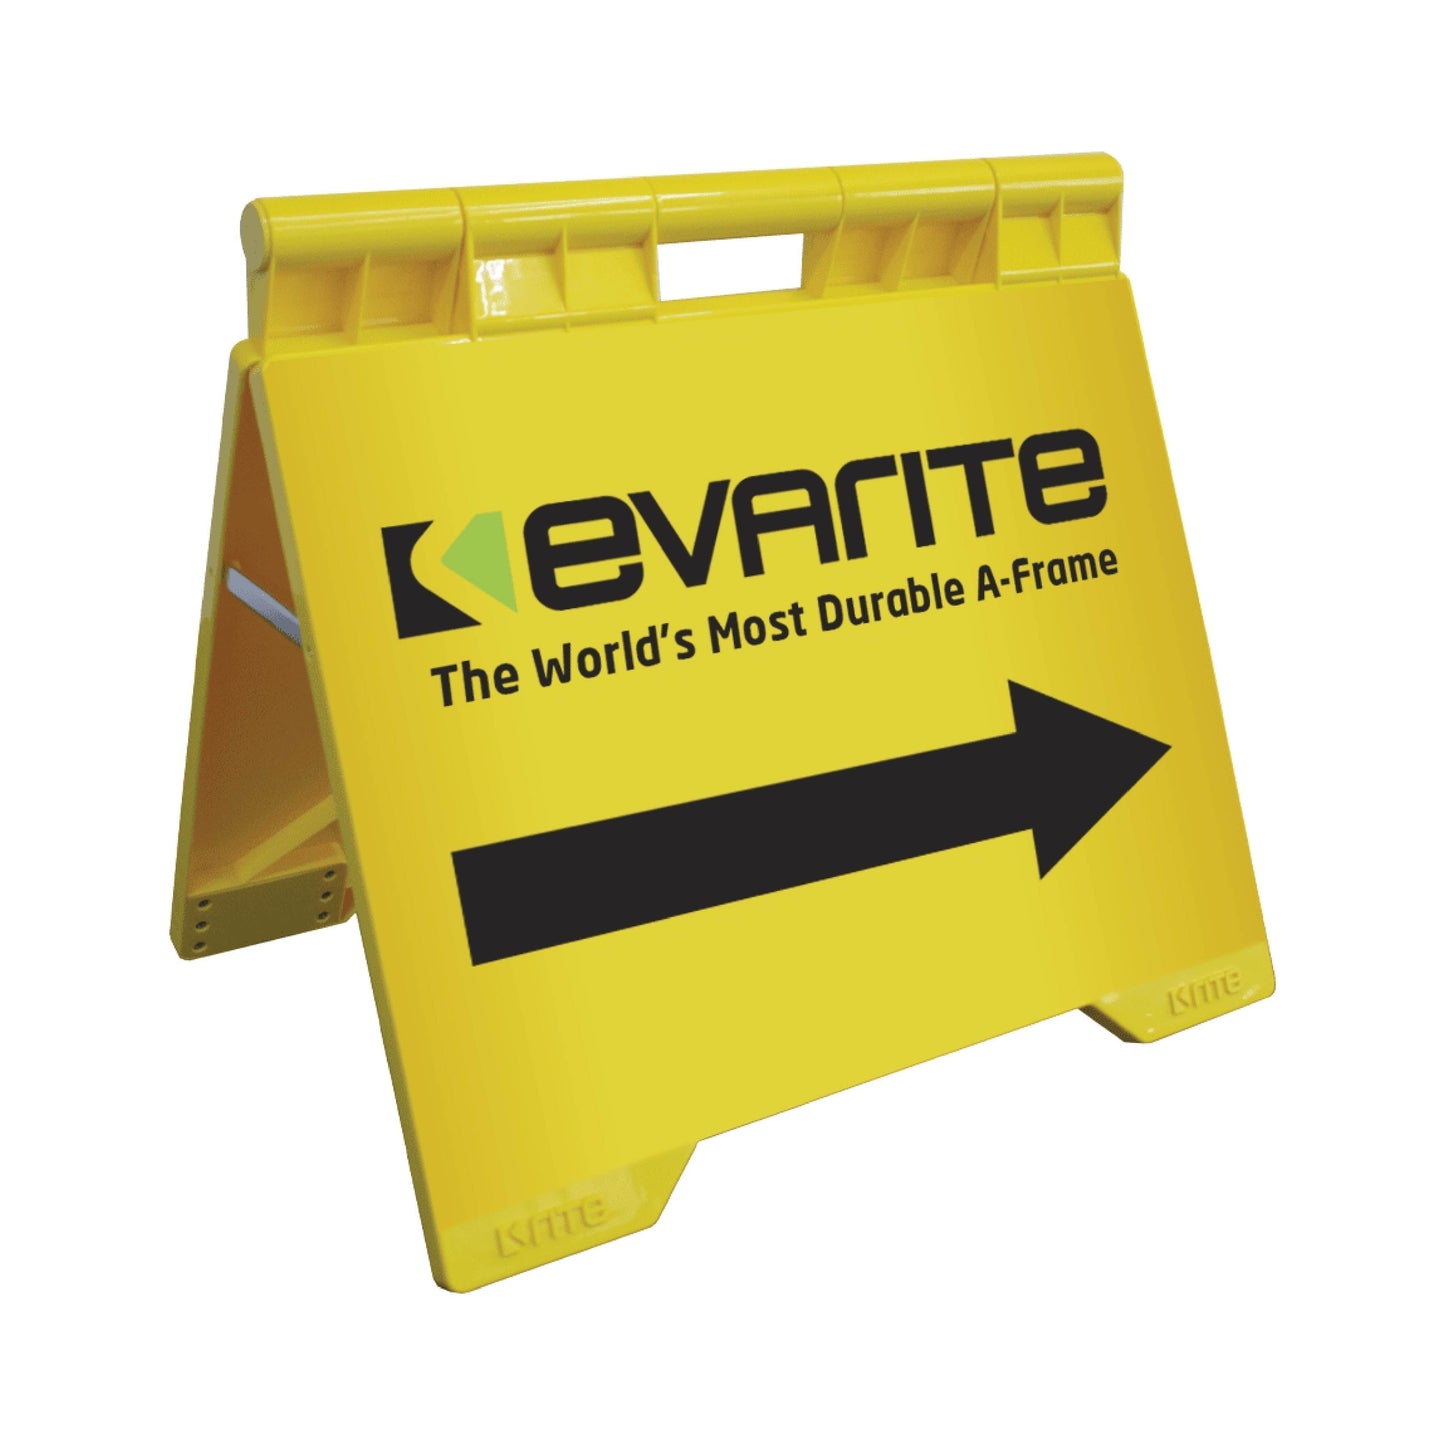 Please Keep Your Distance While Queuing - Evarite A-Frame Sign